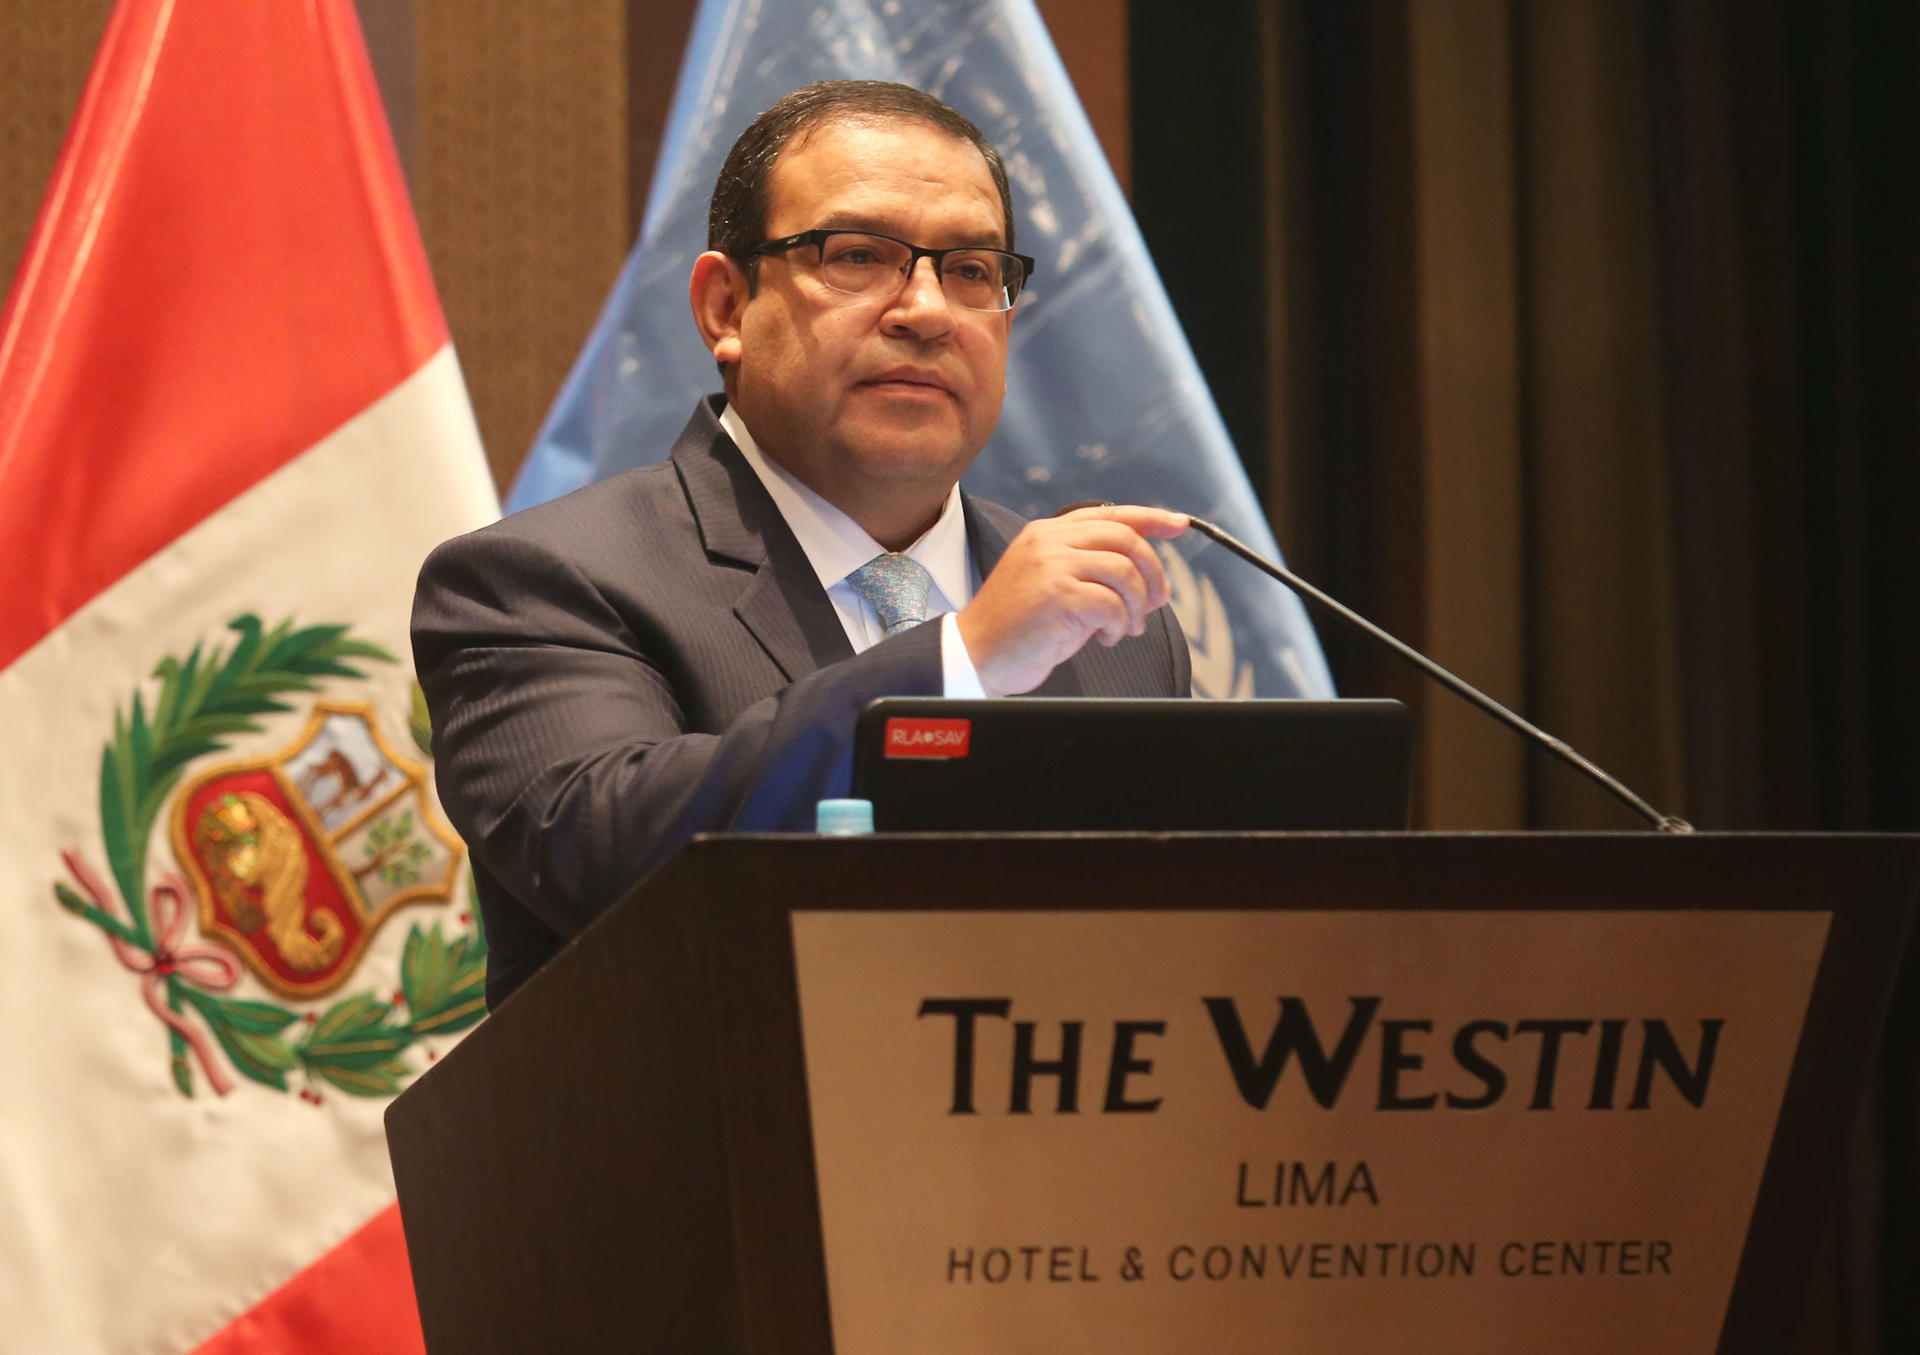 The president of Peru's National Commission for Development and Life without Drugs (Devida), Alberto Otálora, during a presentation at the annual coca crop monitoring report released today, Wednesday, July 13, 2016, by the United Nations Office on Drugs and Crime (UNODC) in Lima, Peru. EFE/ERNESTO ARIAS